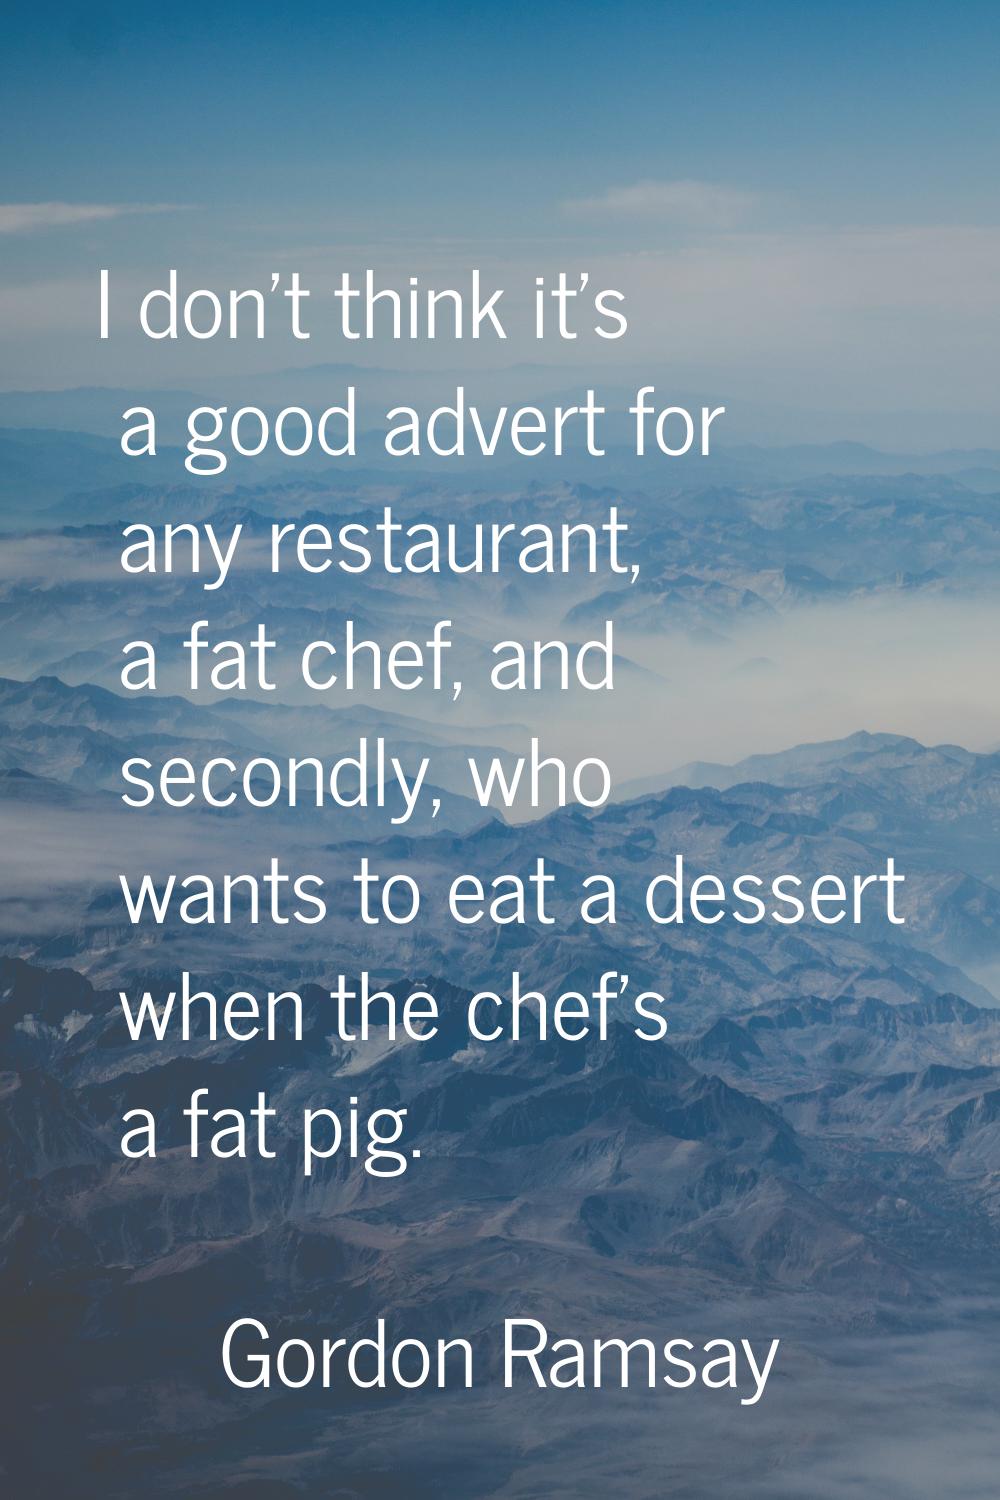 I don't think it's a good advert for any restaurant, a fat chef, and secondly, who wants to eat a d